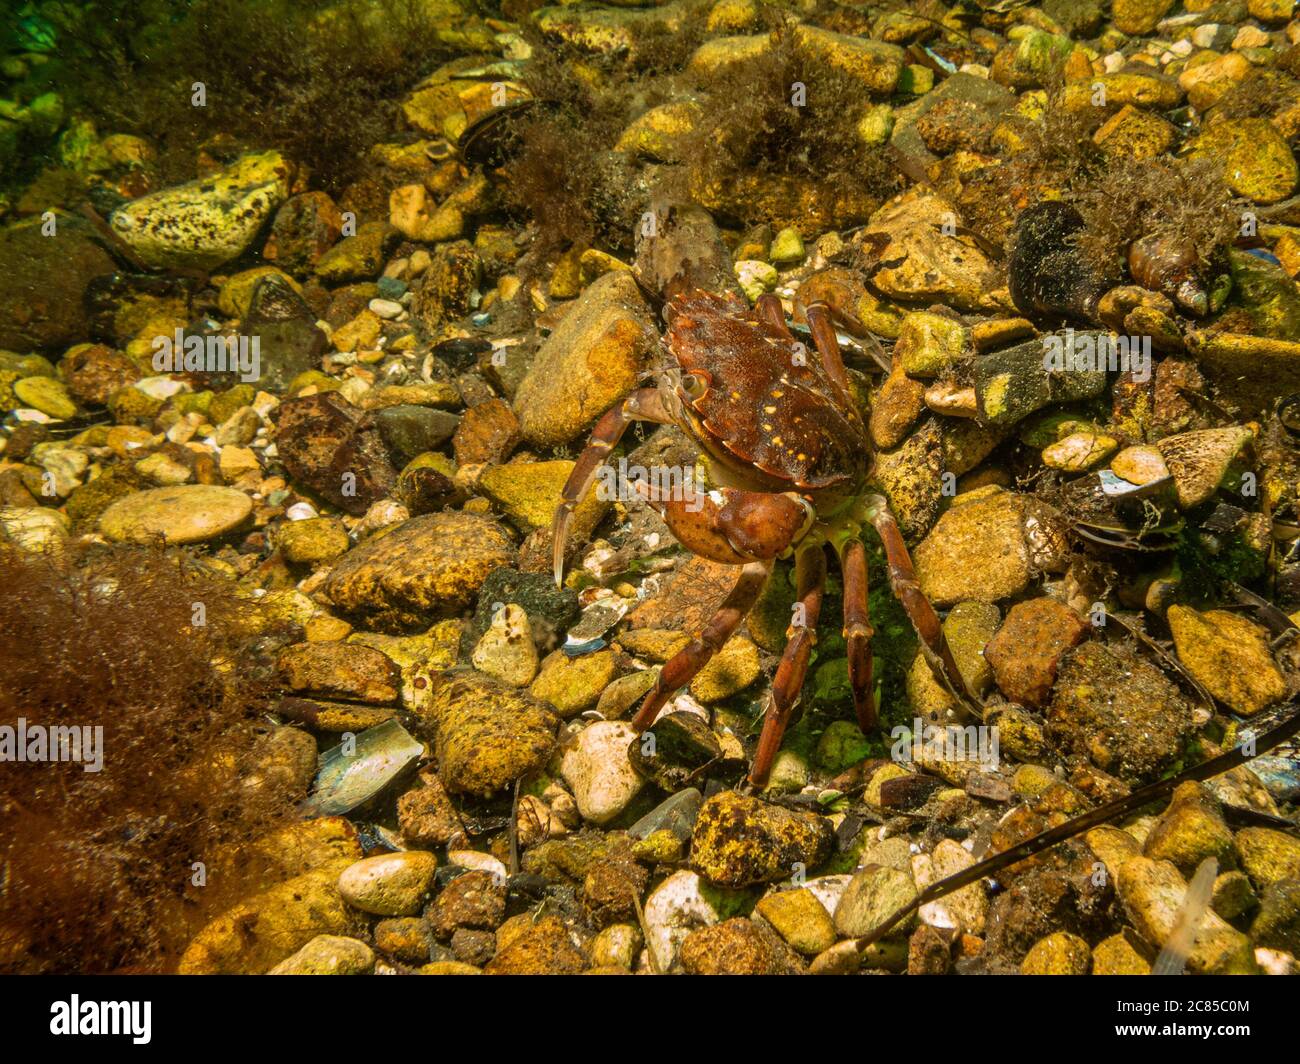 A closeup picture of a crab underwater. Picture from Oresund, Malmo in southern Sweden. Stock Photo